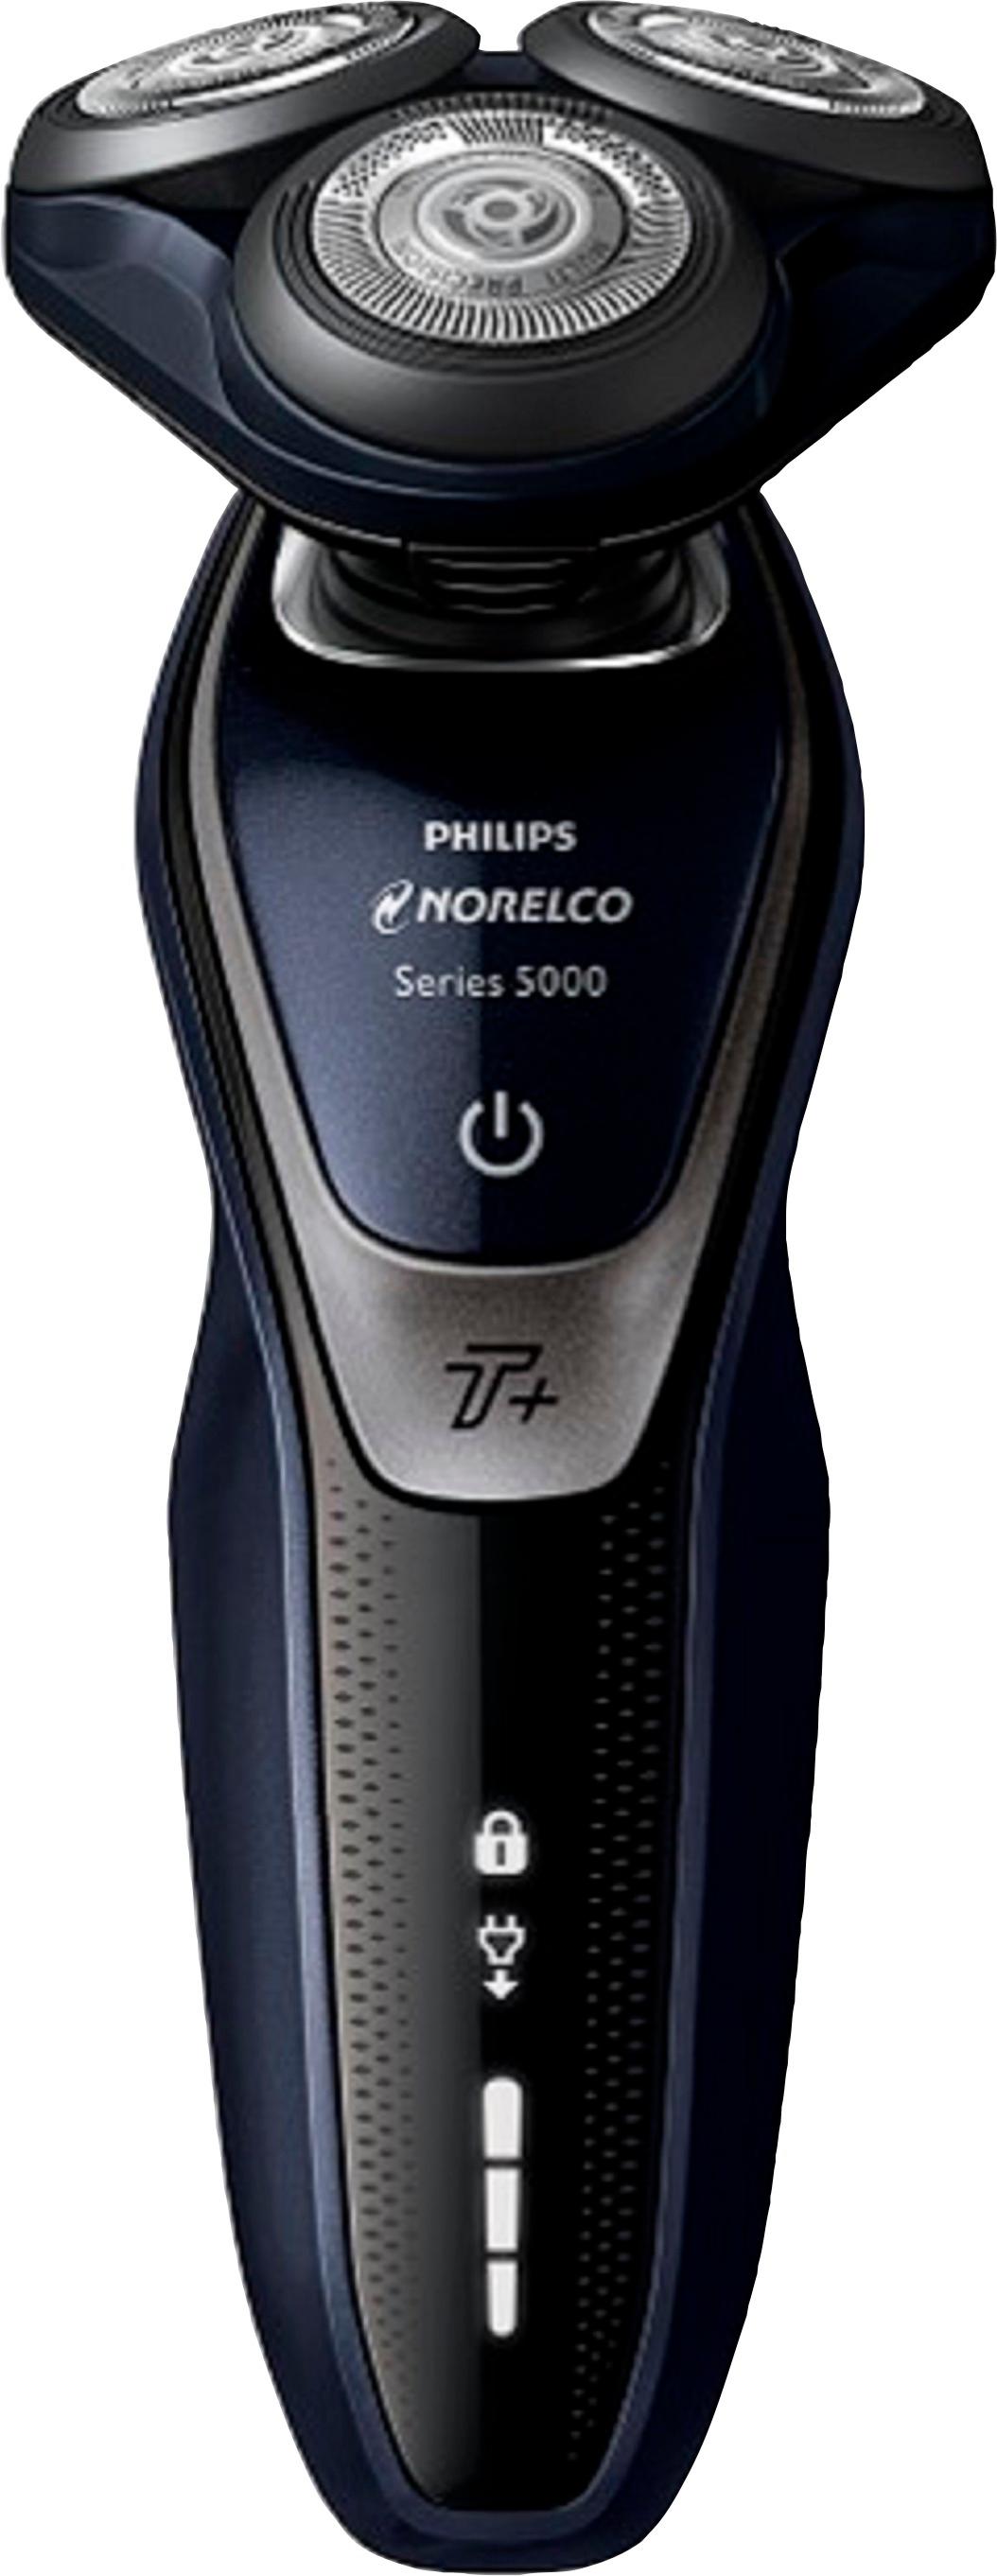 Best Buy: Philips Norelco Series 5000 Wet/Dry Electric Shaver Black S5590/81